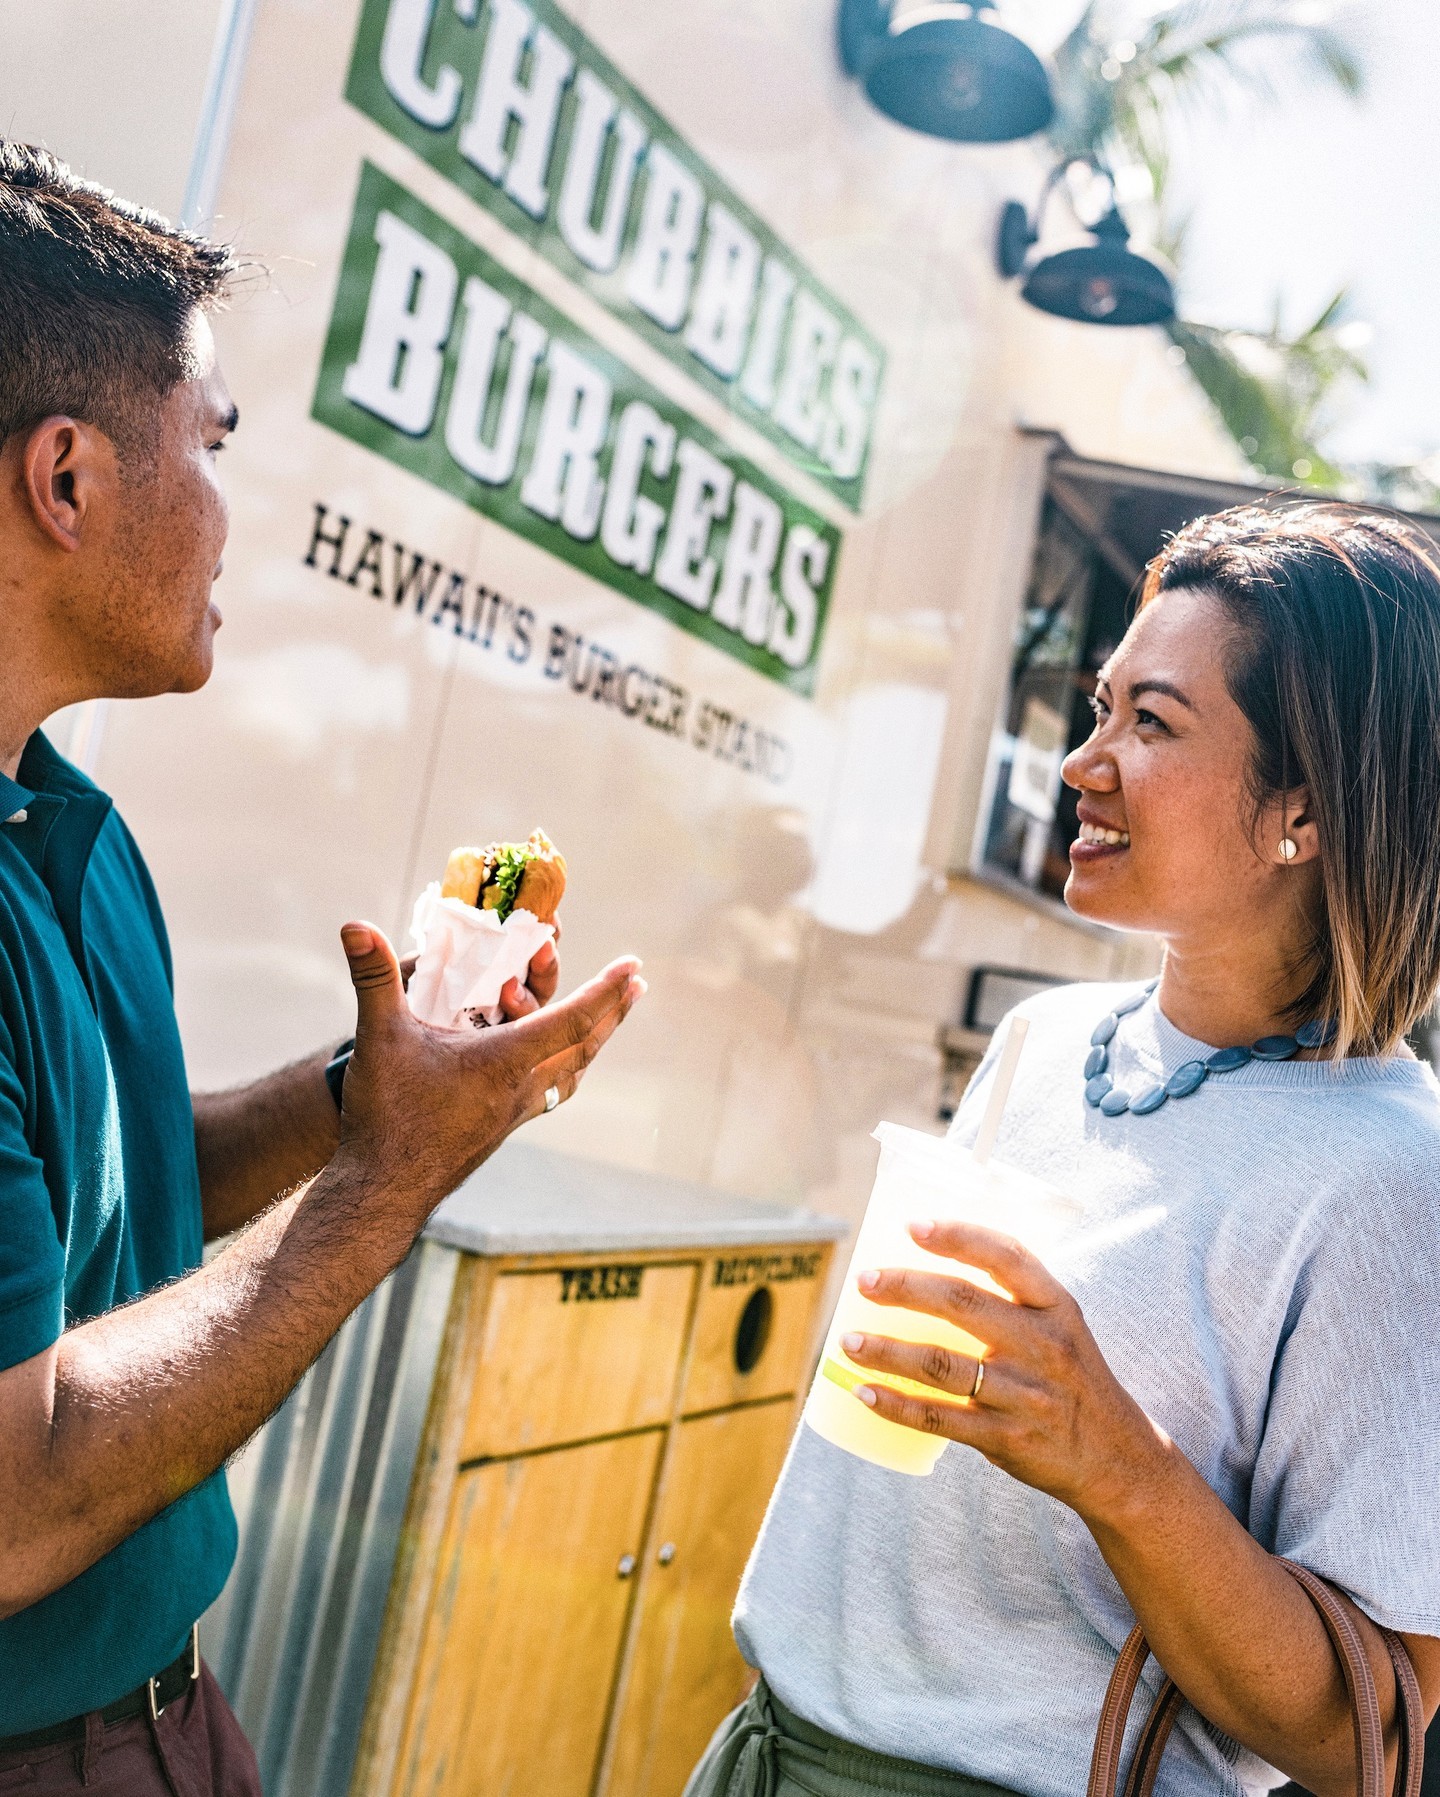 Popular neighborhood eatery options like @chubbieshawaii mean outdoor dining is always on the menu at Ward Village. Chubbies’ juicy, fresh burgers are topped with local produce, homemade sauces and tucked into a house-made bun. Located next to Victoria Ward Park, enjoy your food to go picnic style!